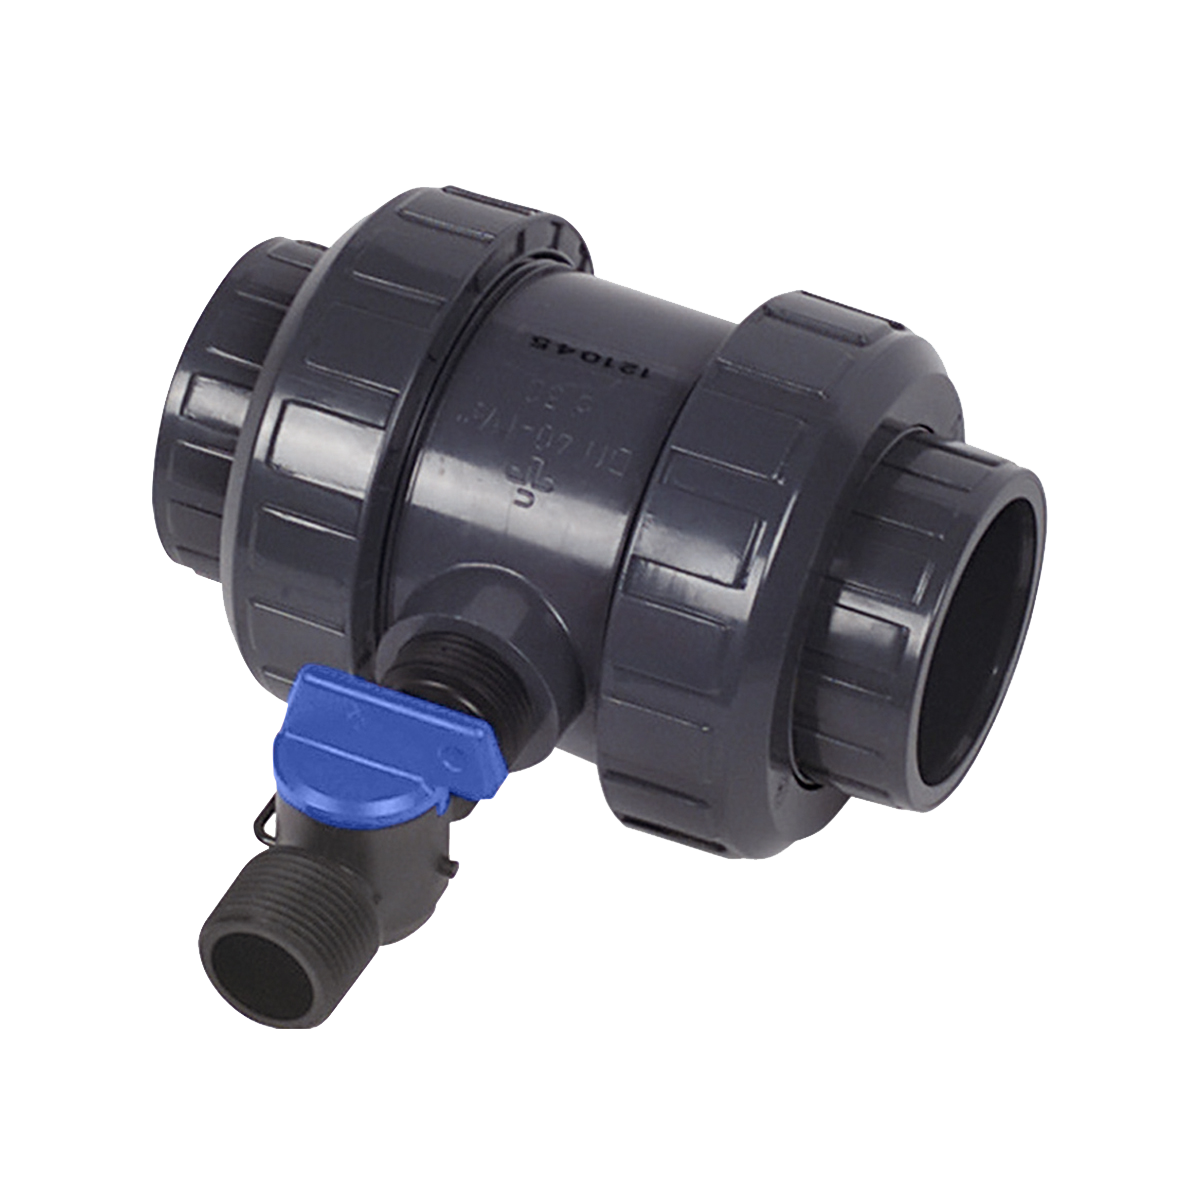 Cone Check Valve S6 with R 3/4" connection, DN40 PVC grey PVCu solvent socket ends d50 metric PN16 FPM Cone Check Valve S6 with R 3/4" connection, DN40 PVC grey PVCu solvent socket ends d50 metric PN16 FPM